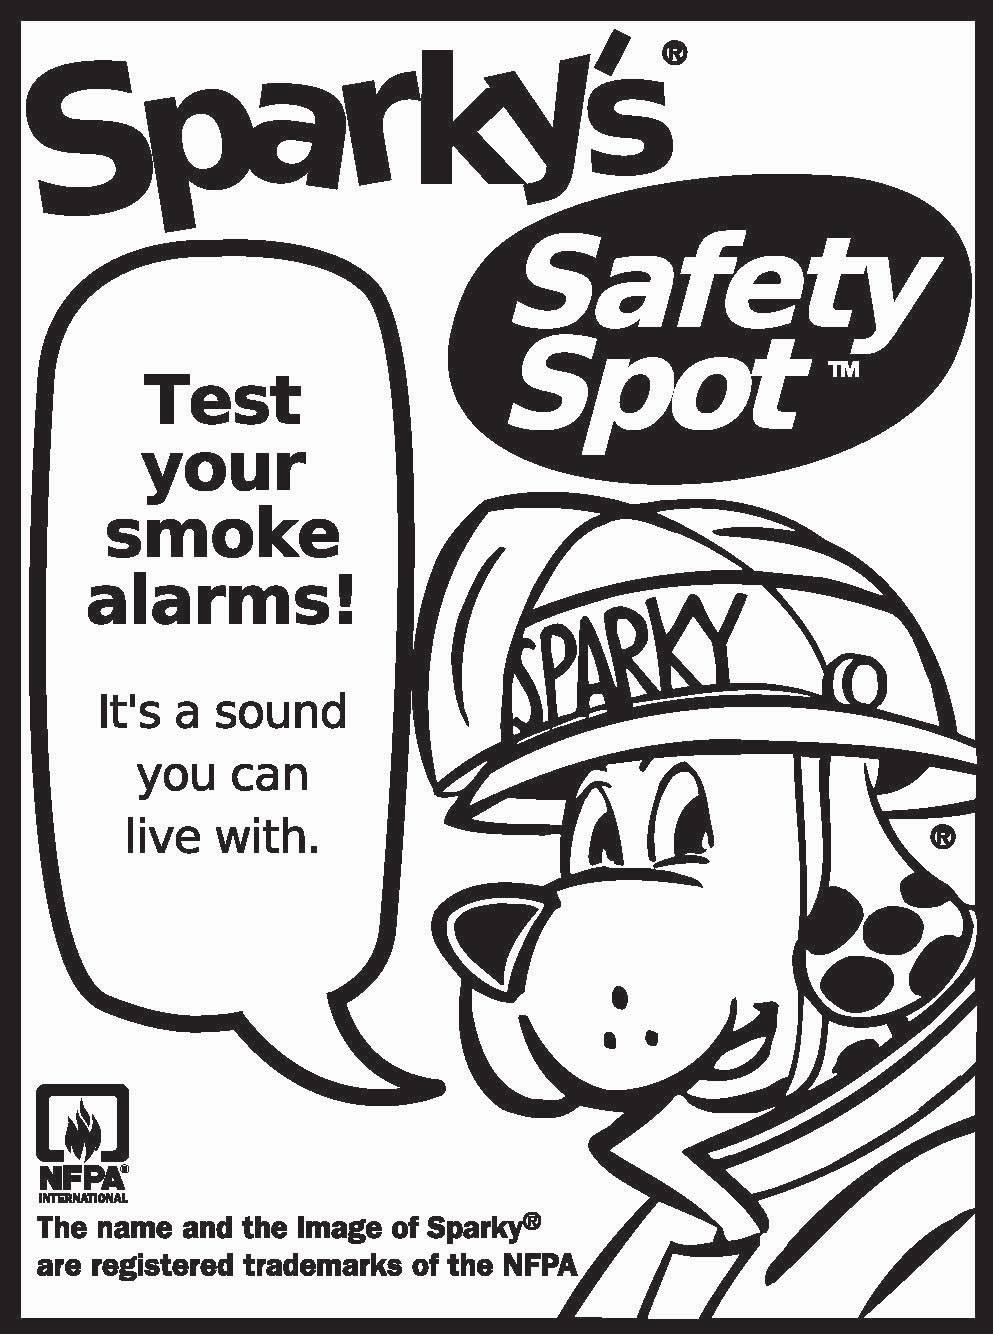 sparky the fire dog coloring pages - Clip Art Library